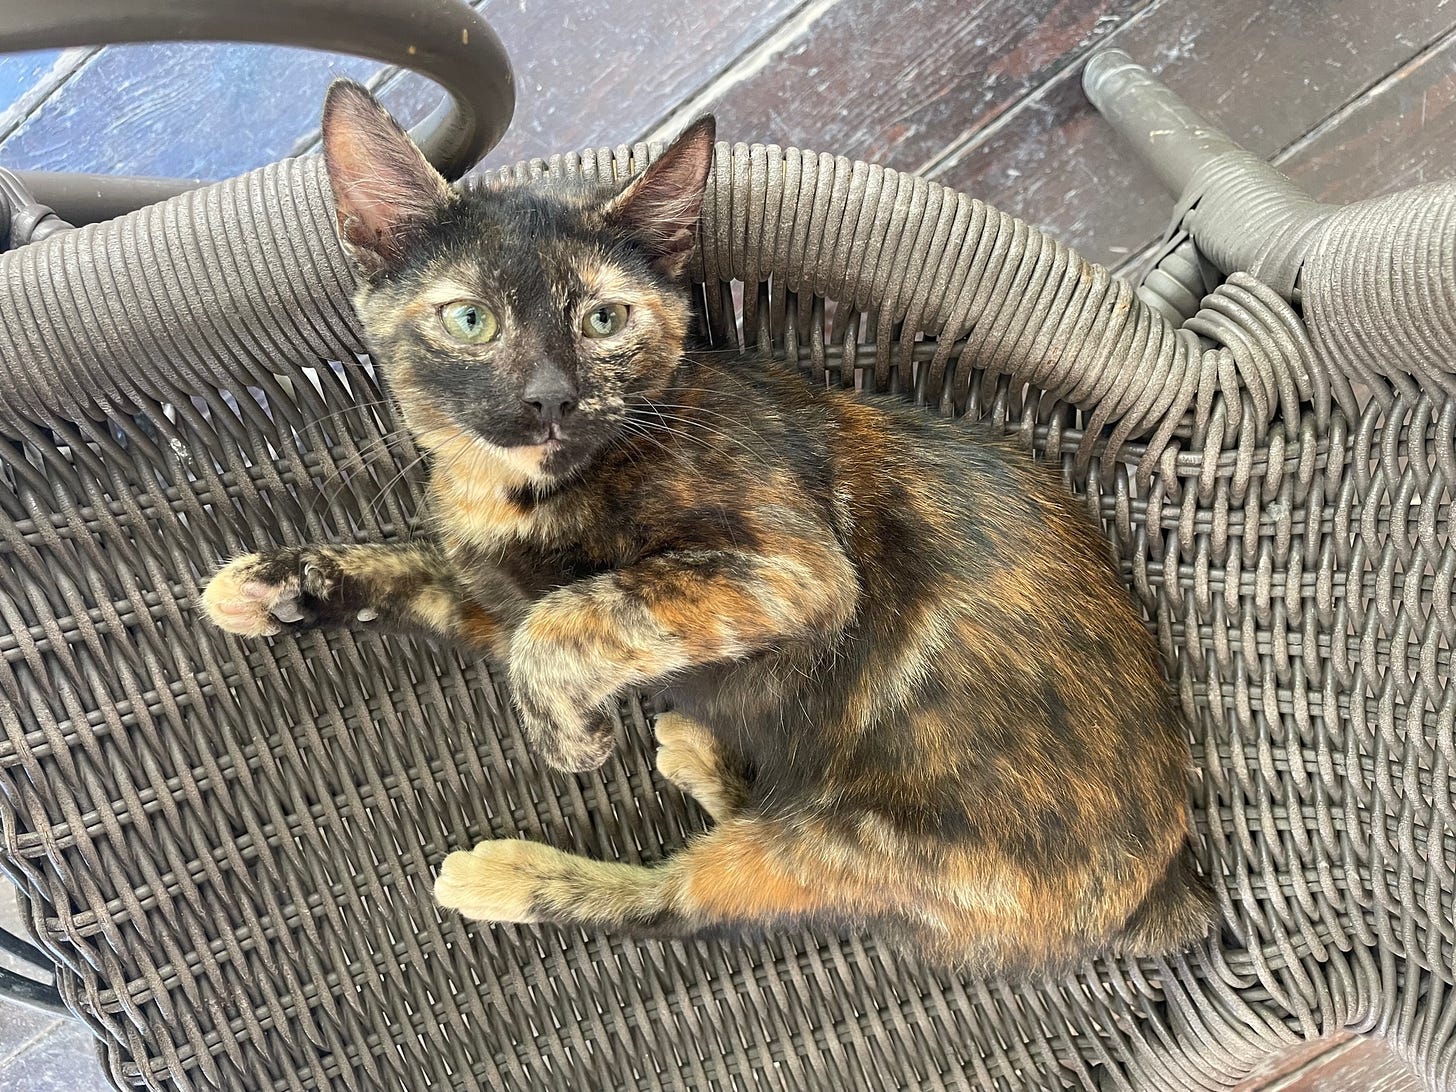 Tortoiseshell cat with no tail laying on rattan chair